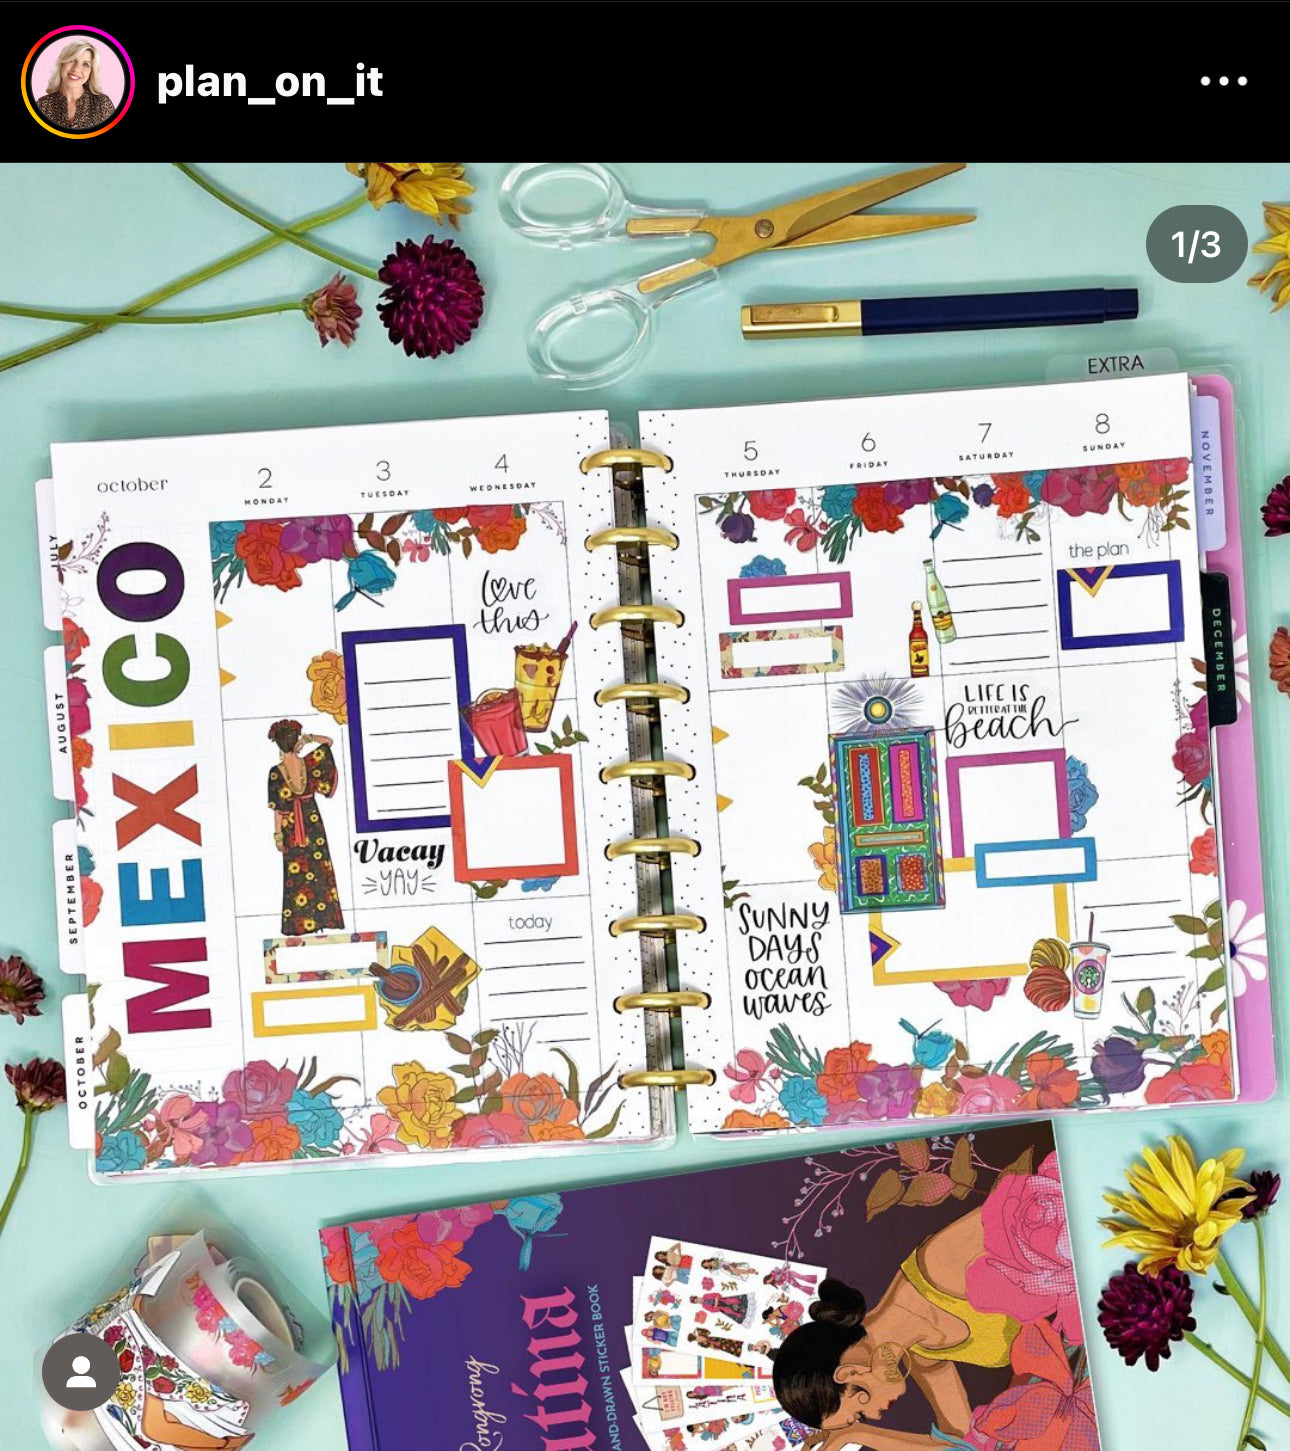 USING PET TAPE TO MAKE A DECORATIVE PLANNER SPREAD, RONGRONG STICKER BOOK  & TAPE